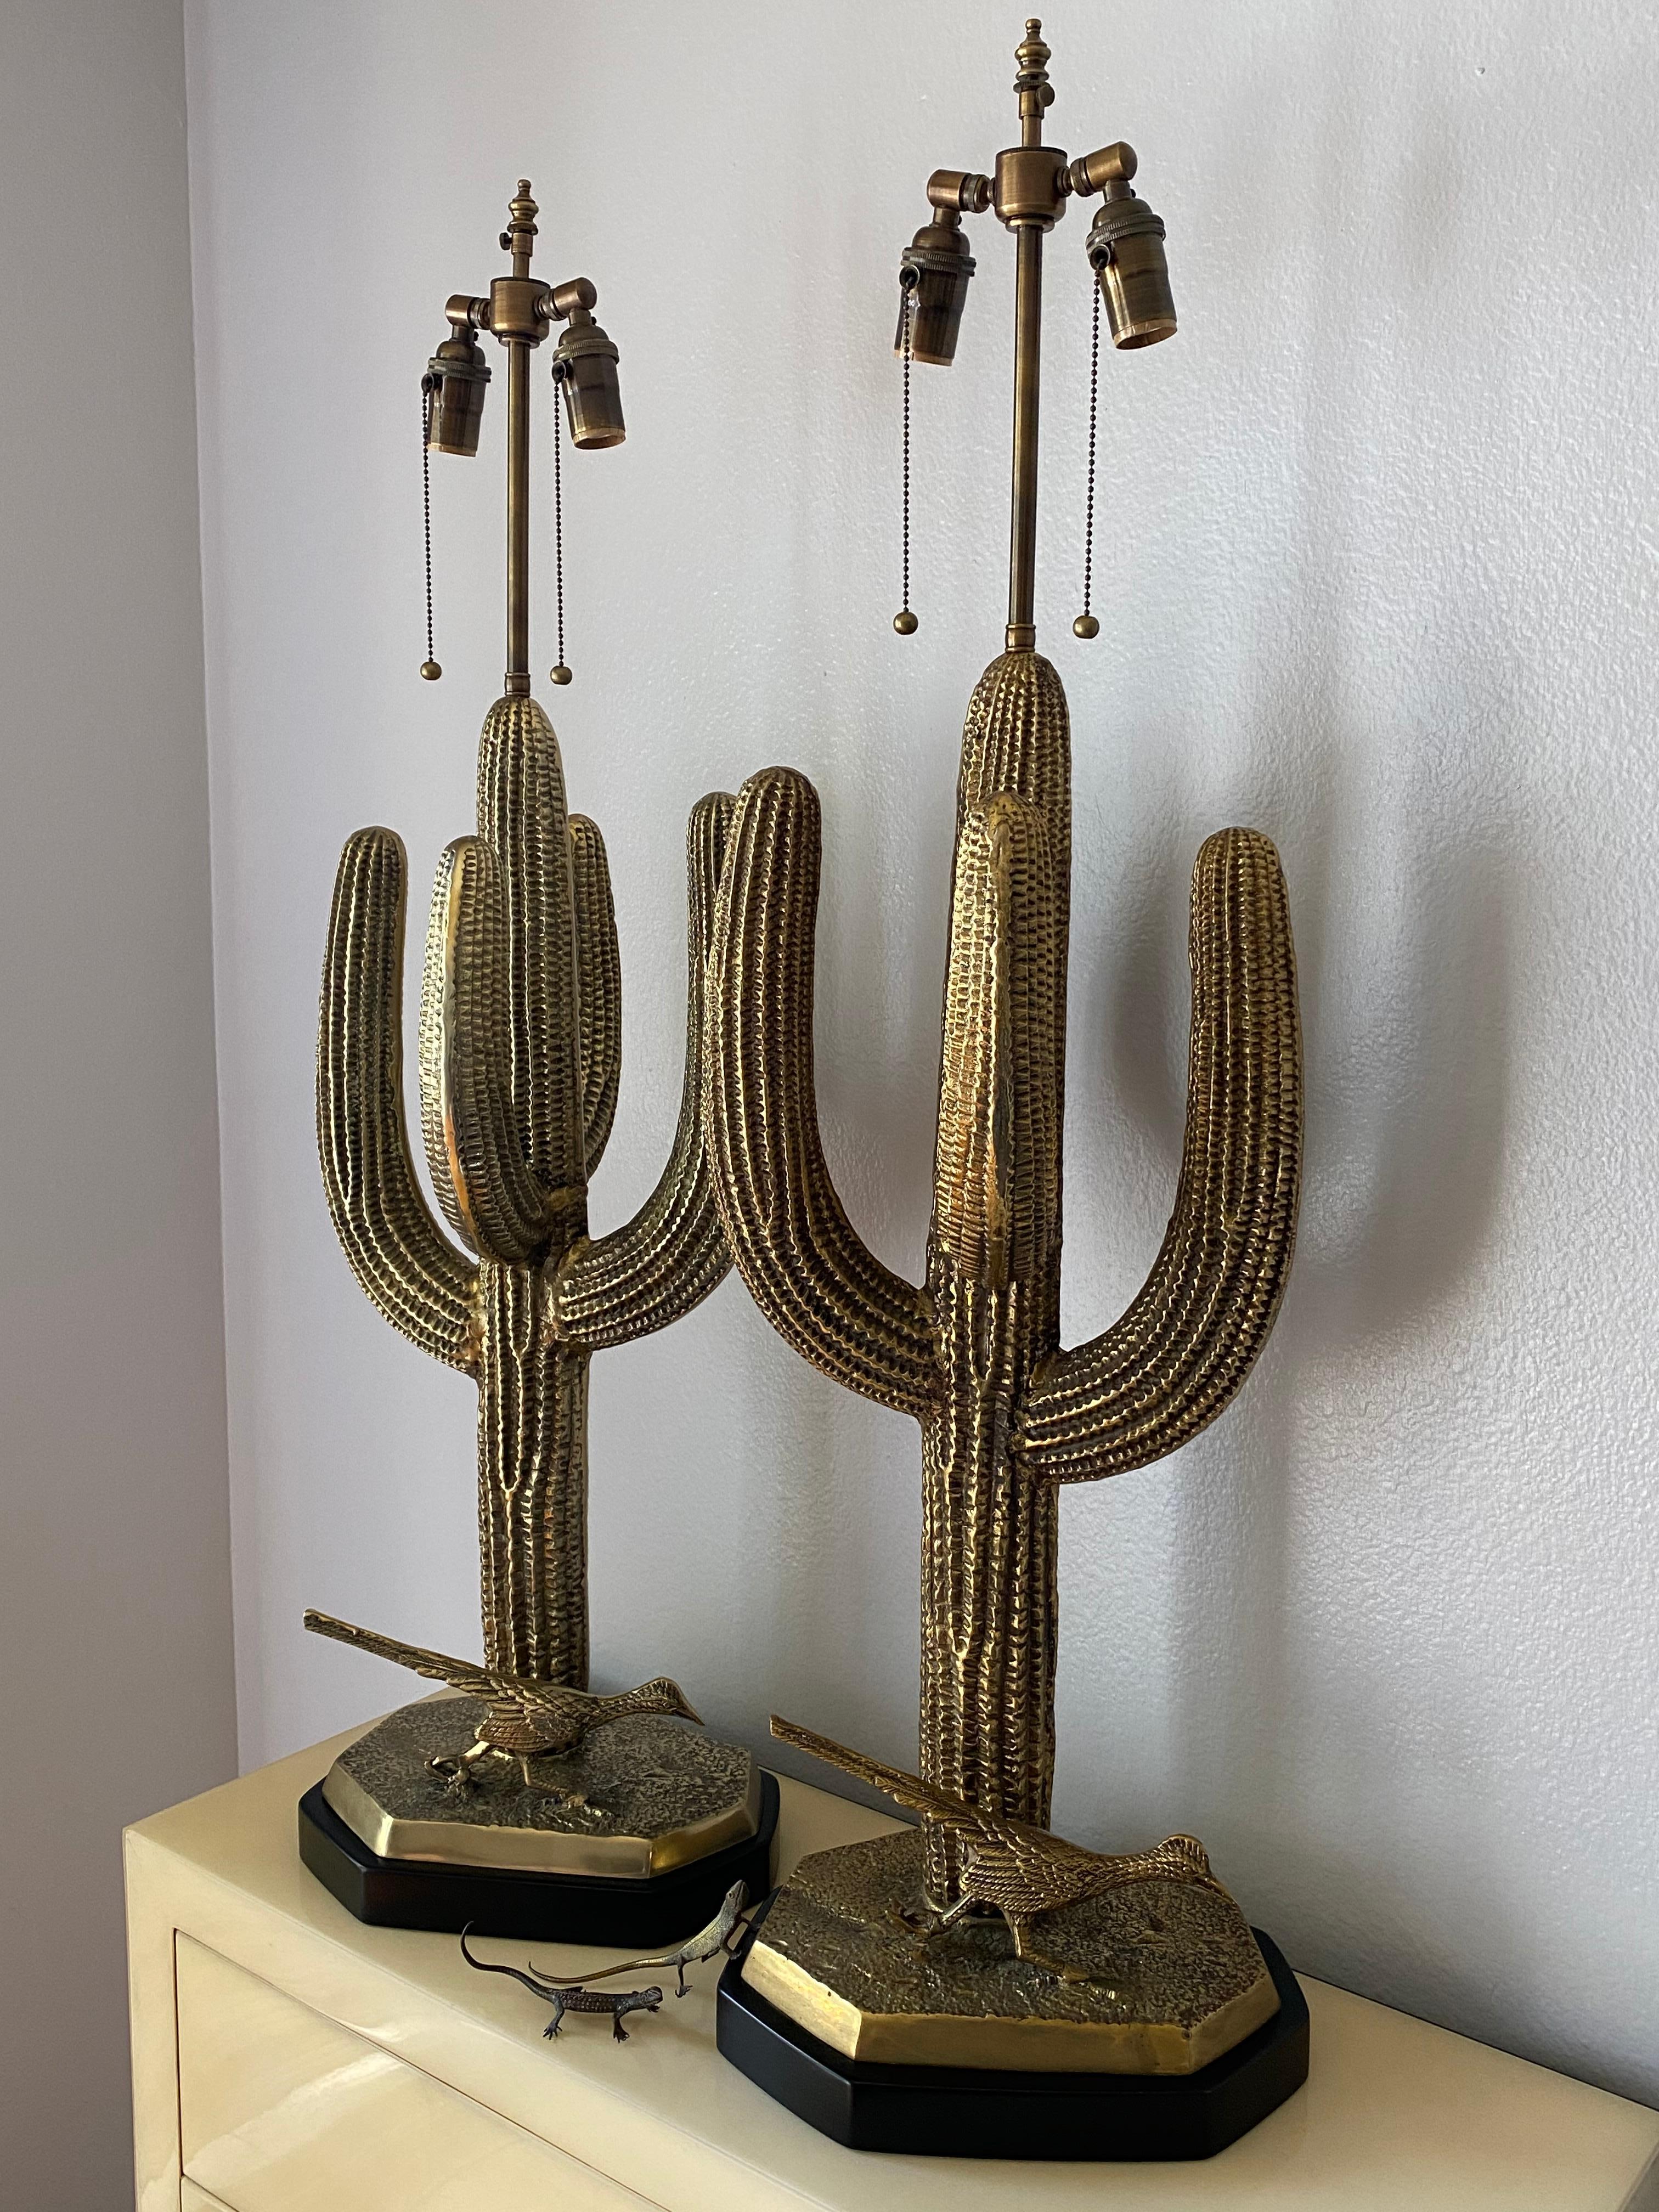 Pair of massive brass saguaro cactus lamps. Lizards are for decoration and are not for sale.